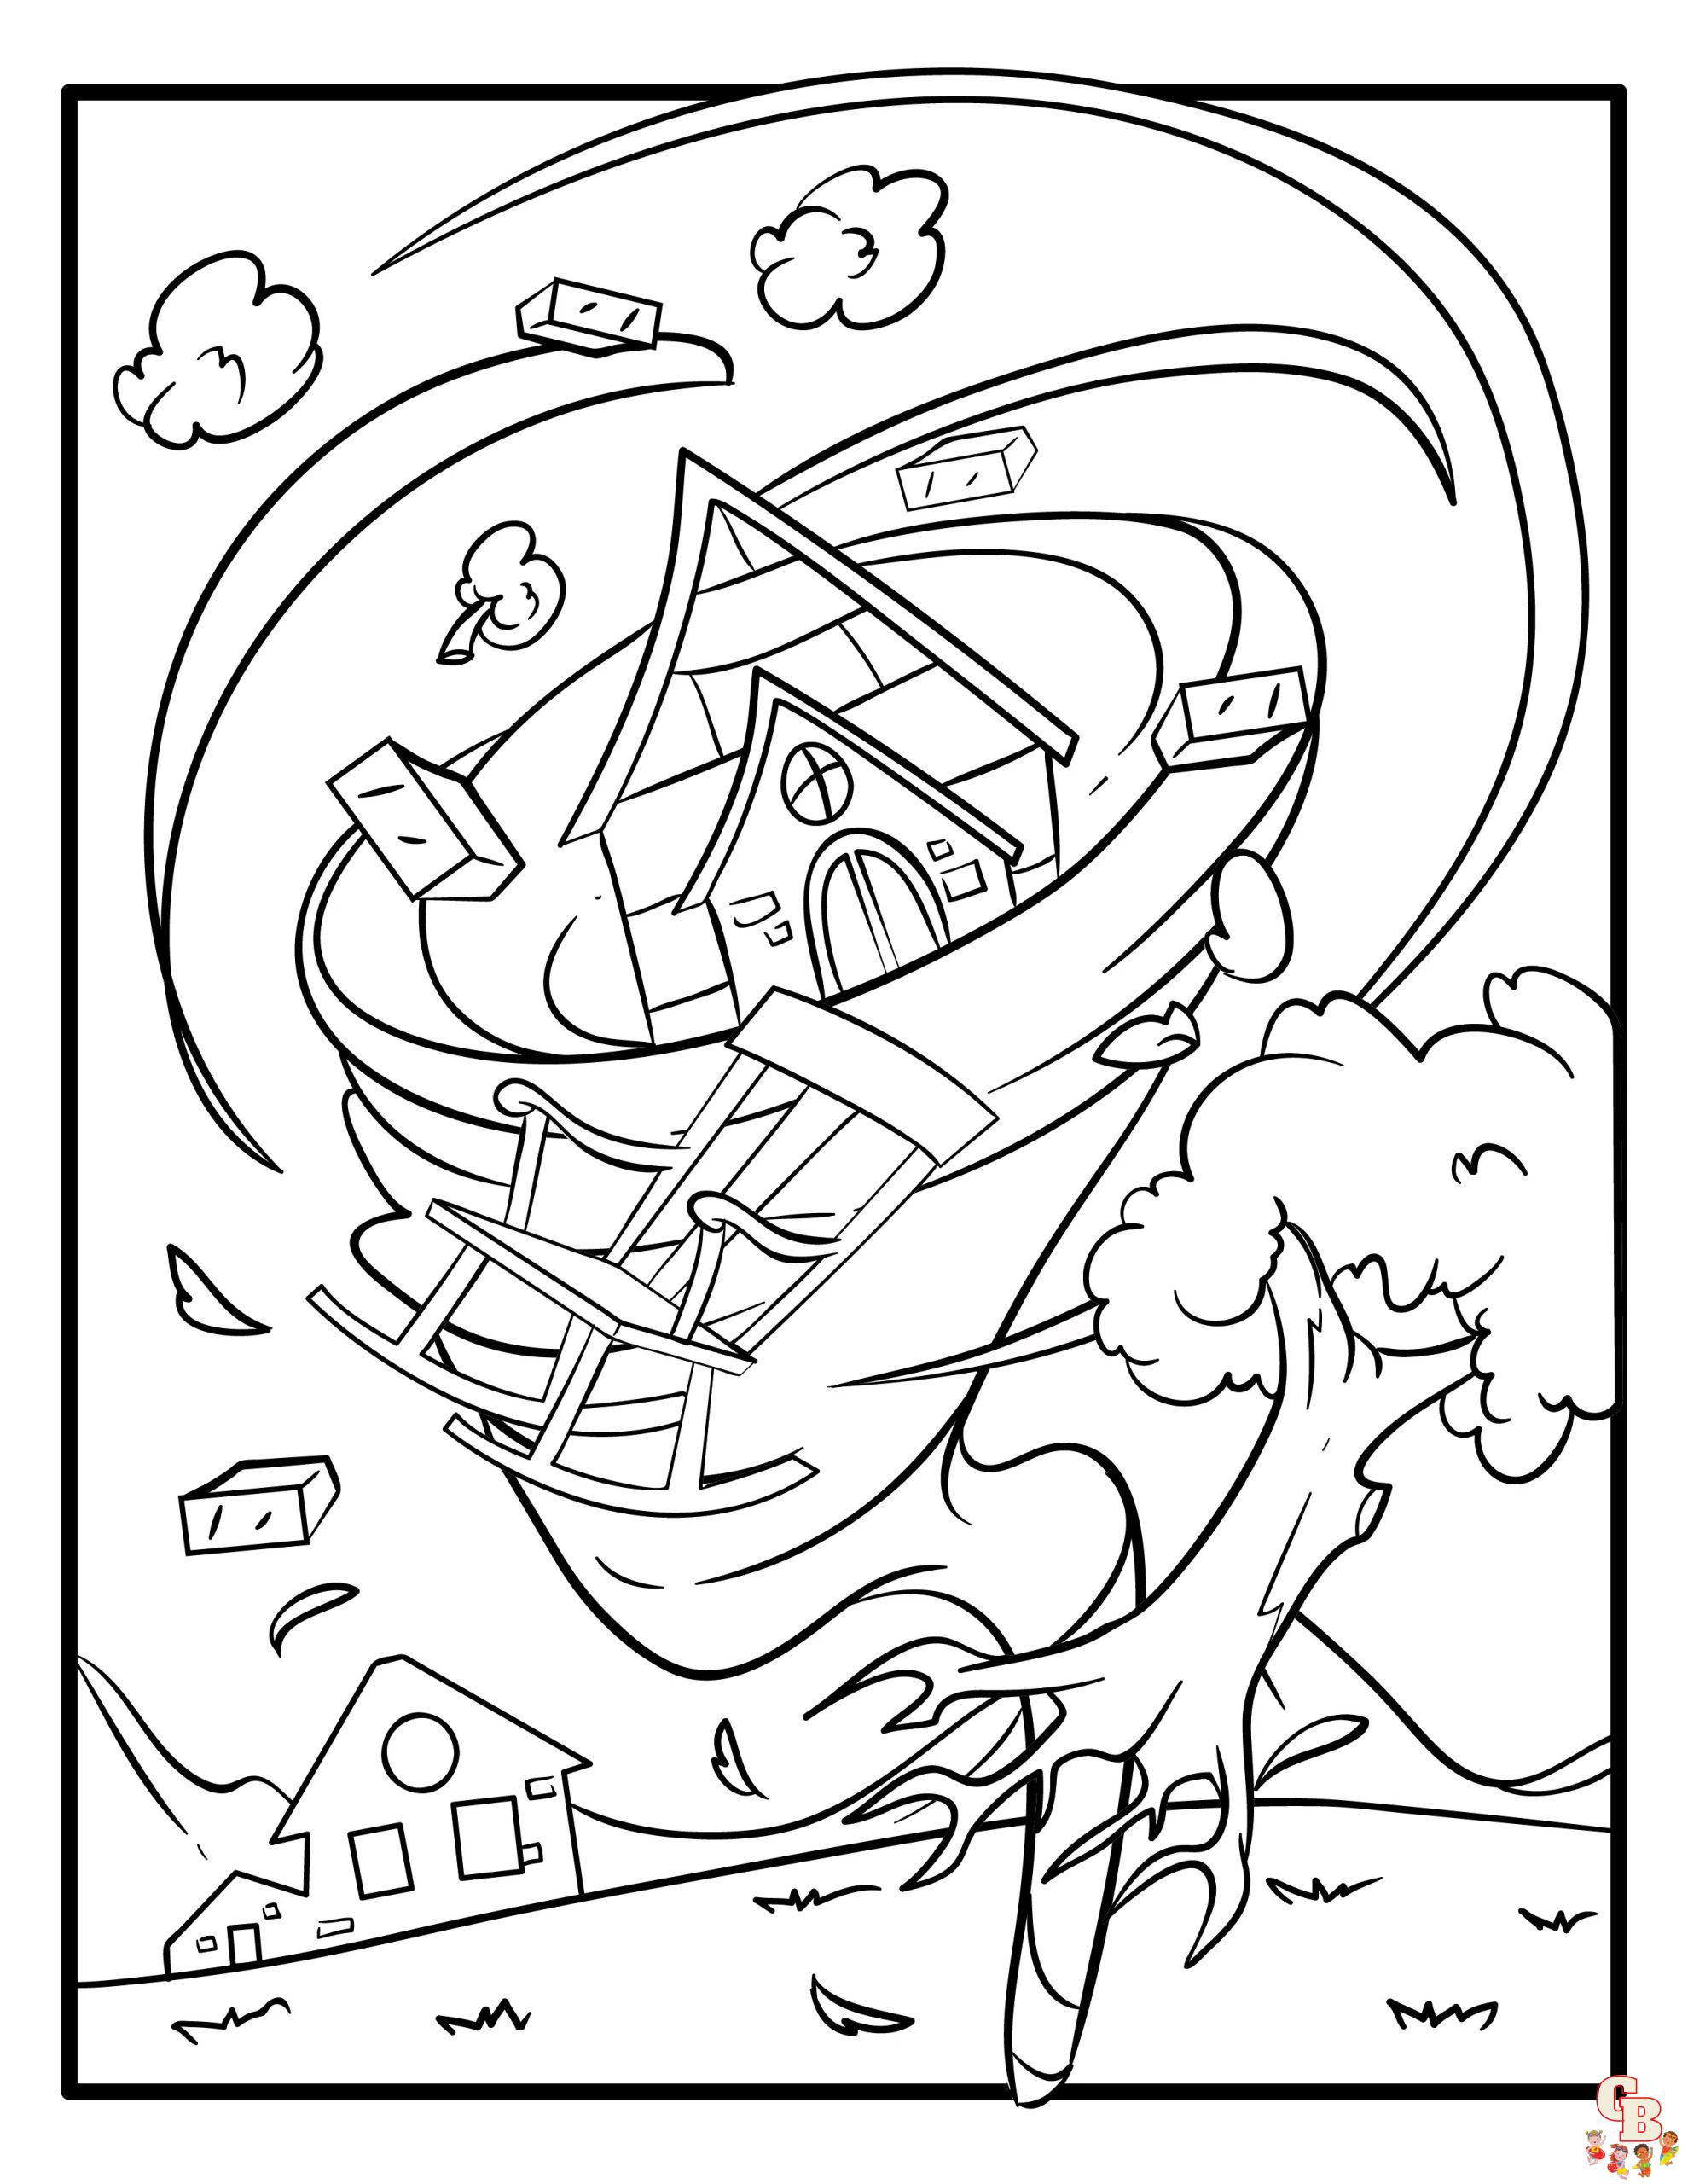 Get Creative with Tornado Coloring Pages: Free Printable Sheets